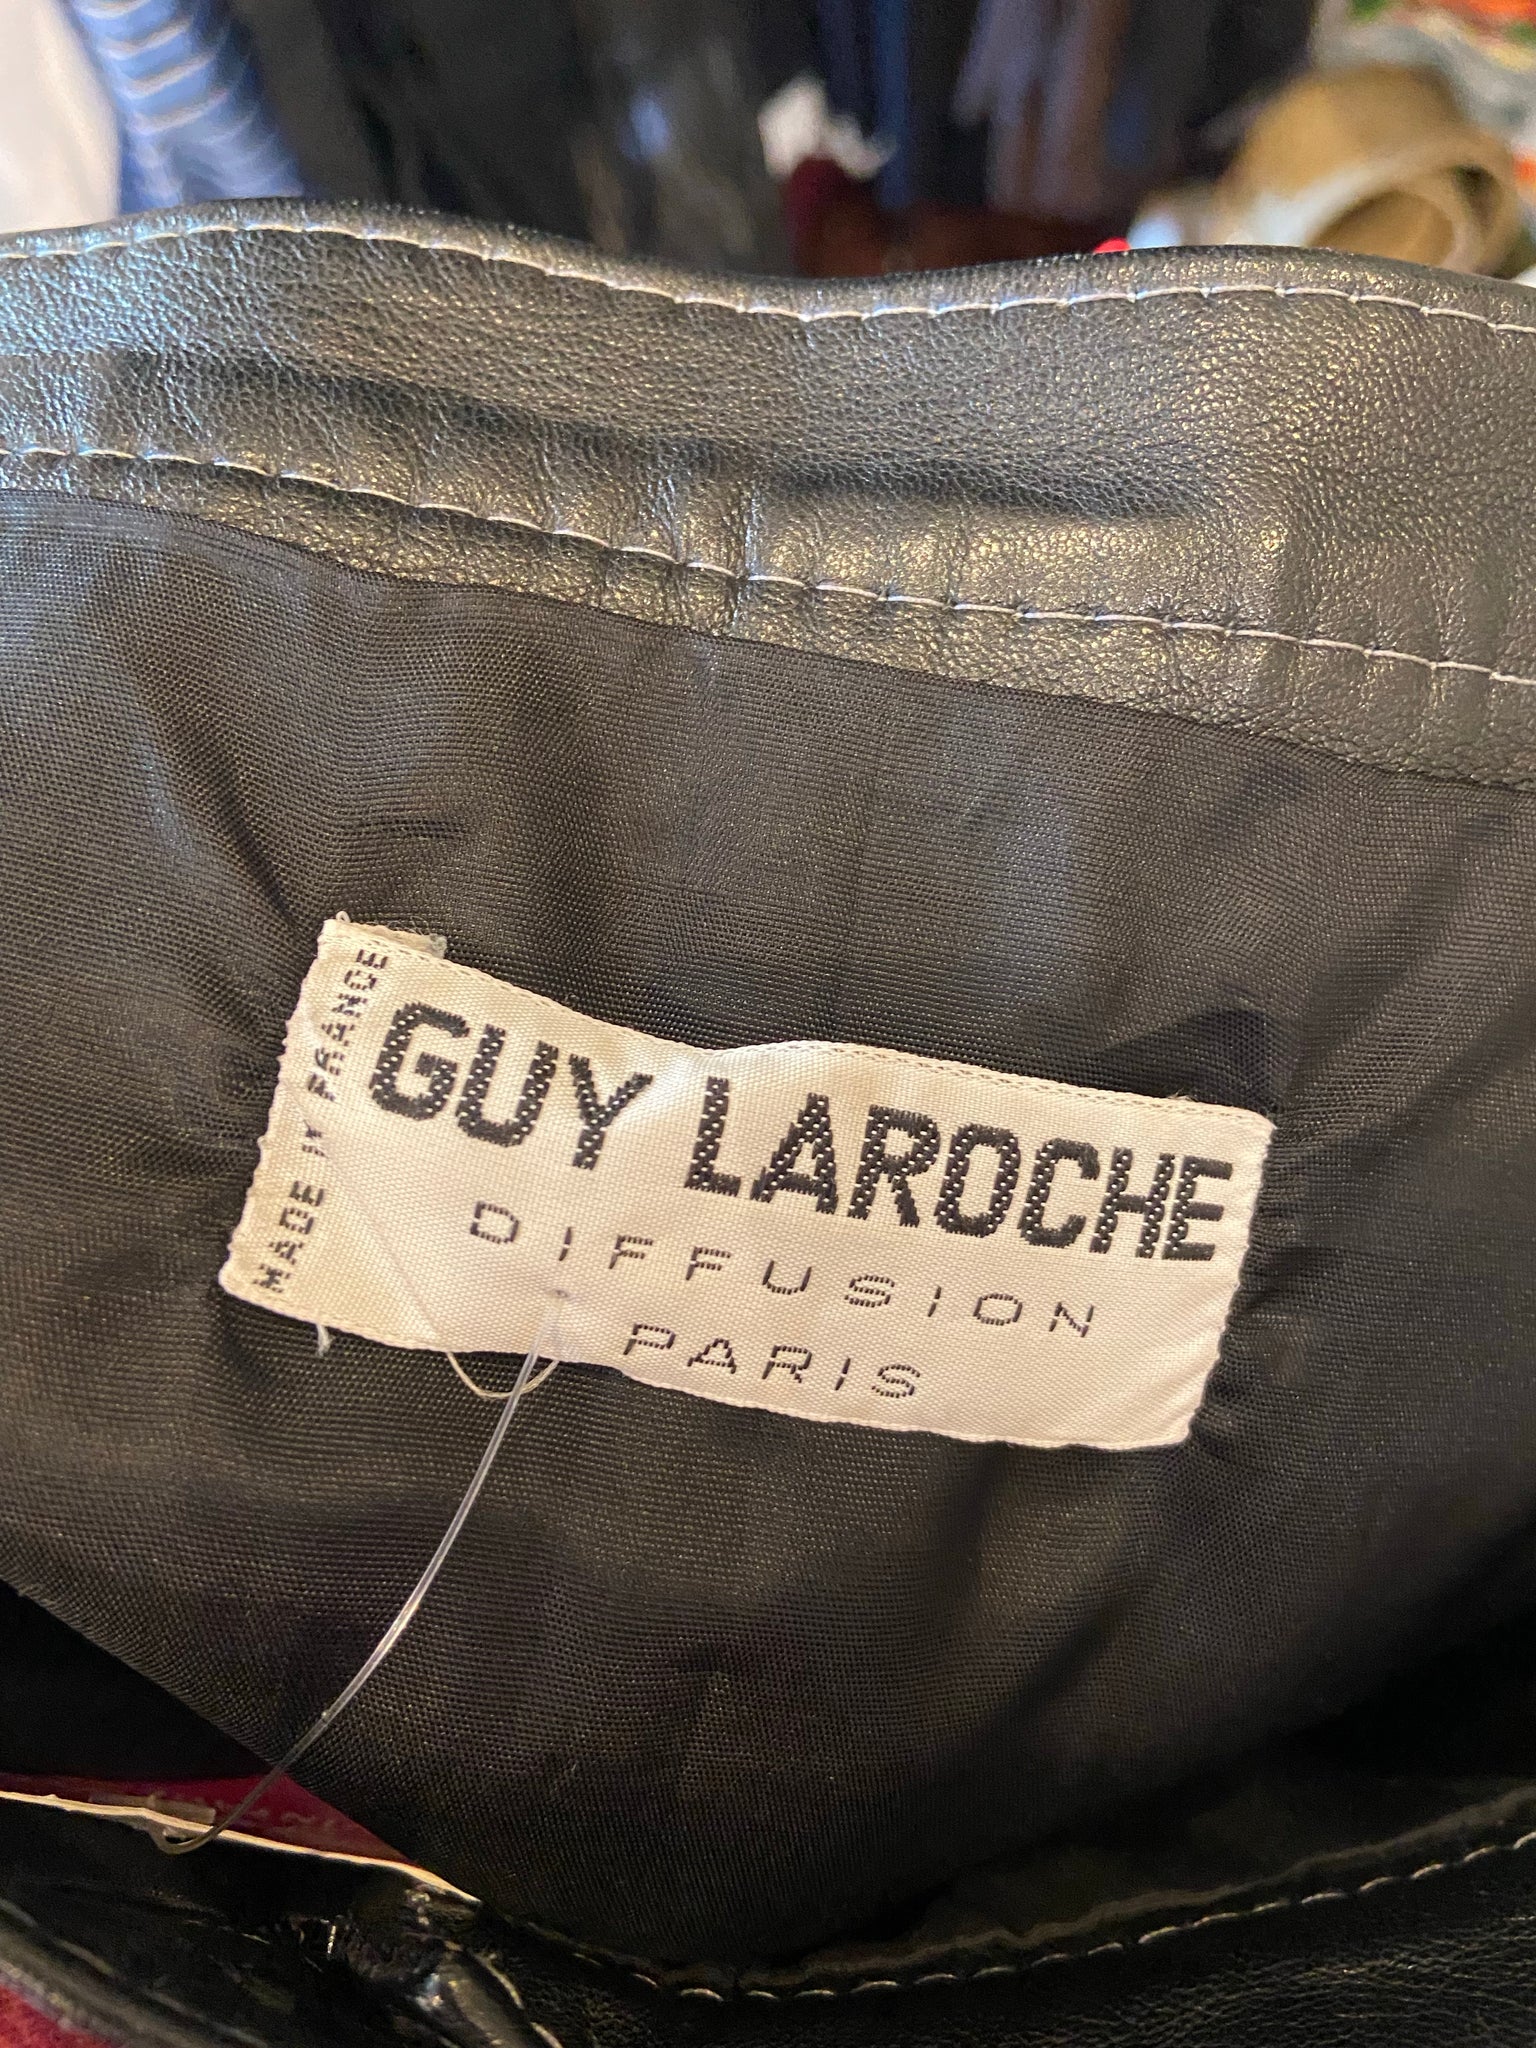 VINTAGE GUY LAROCHE Black Leather Bag Very Good Condition 